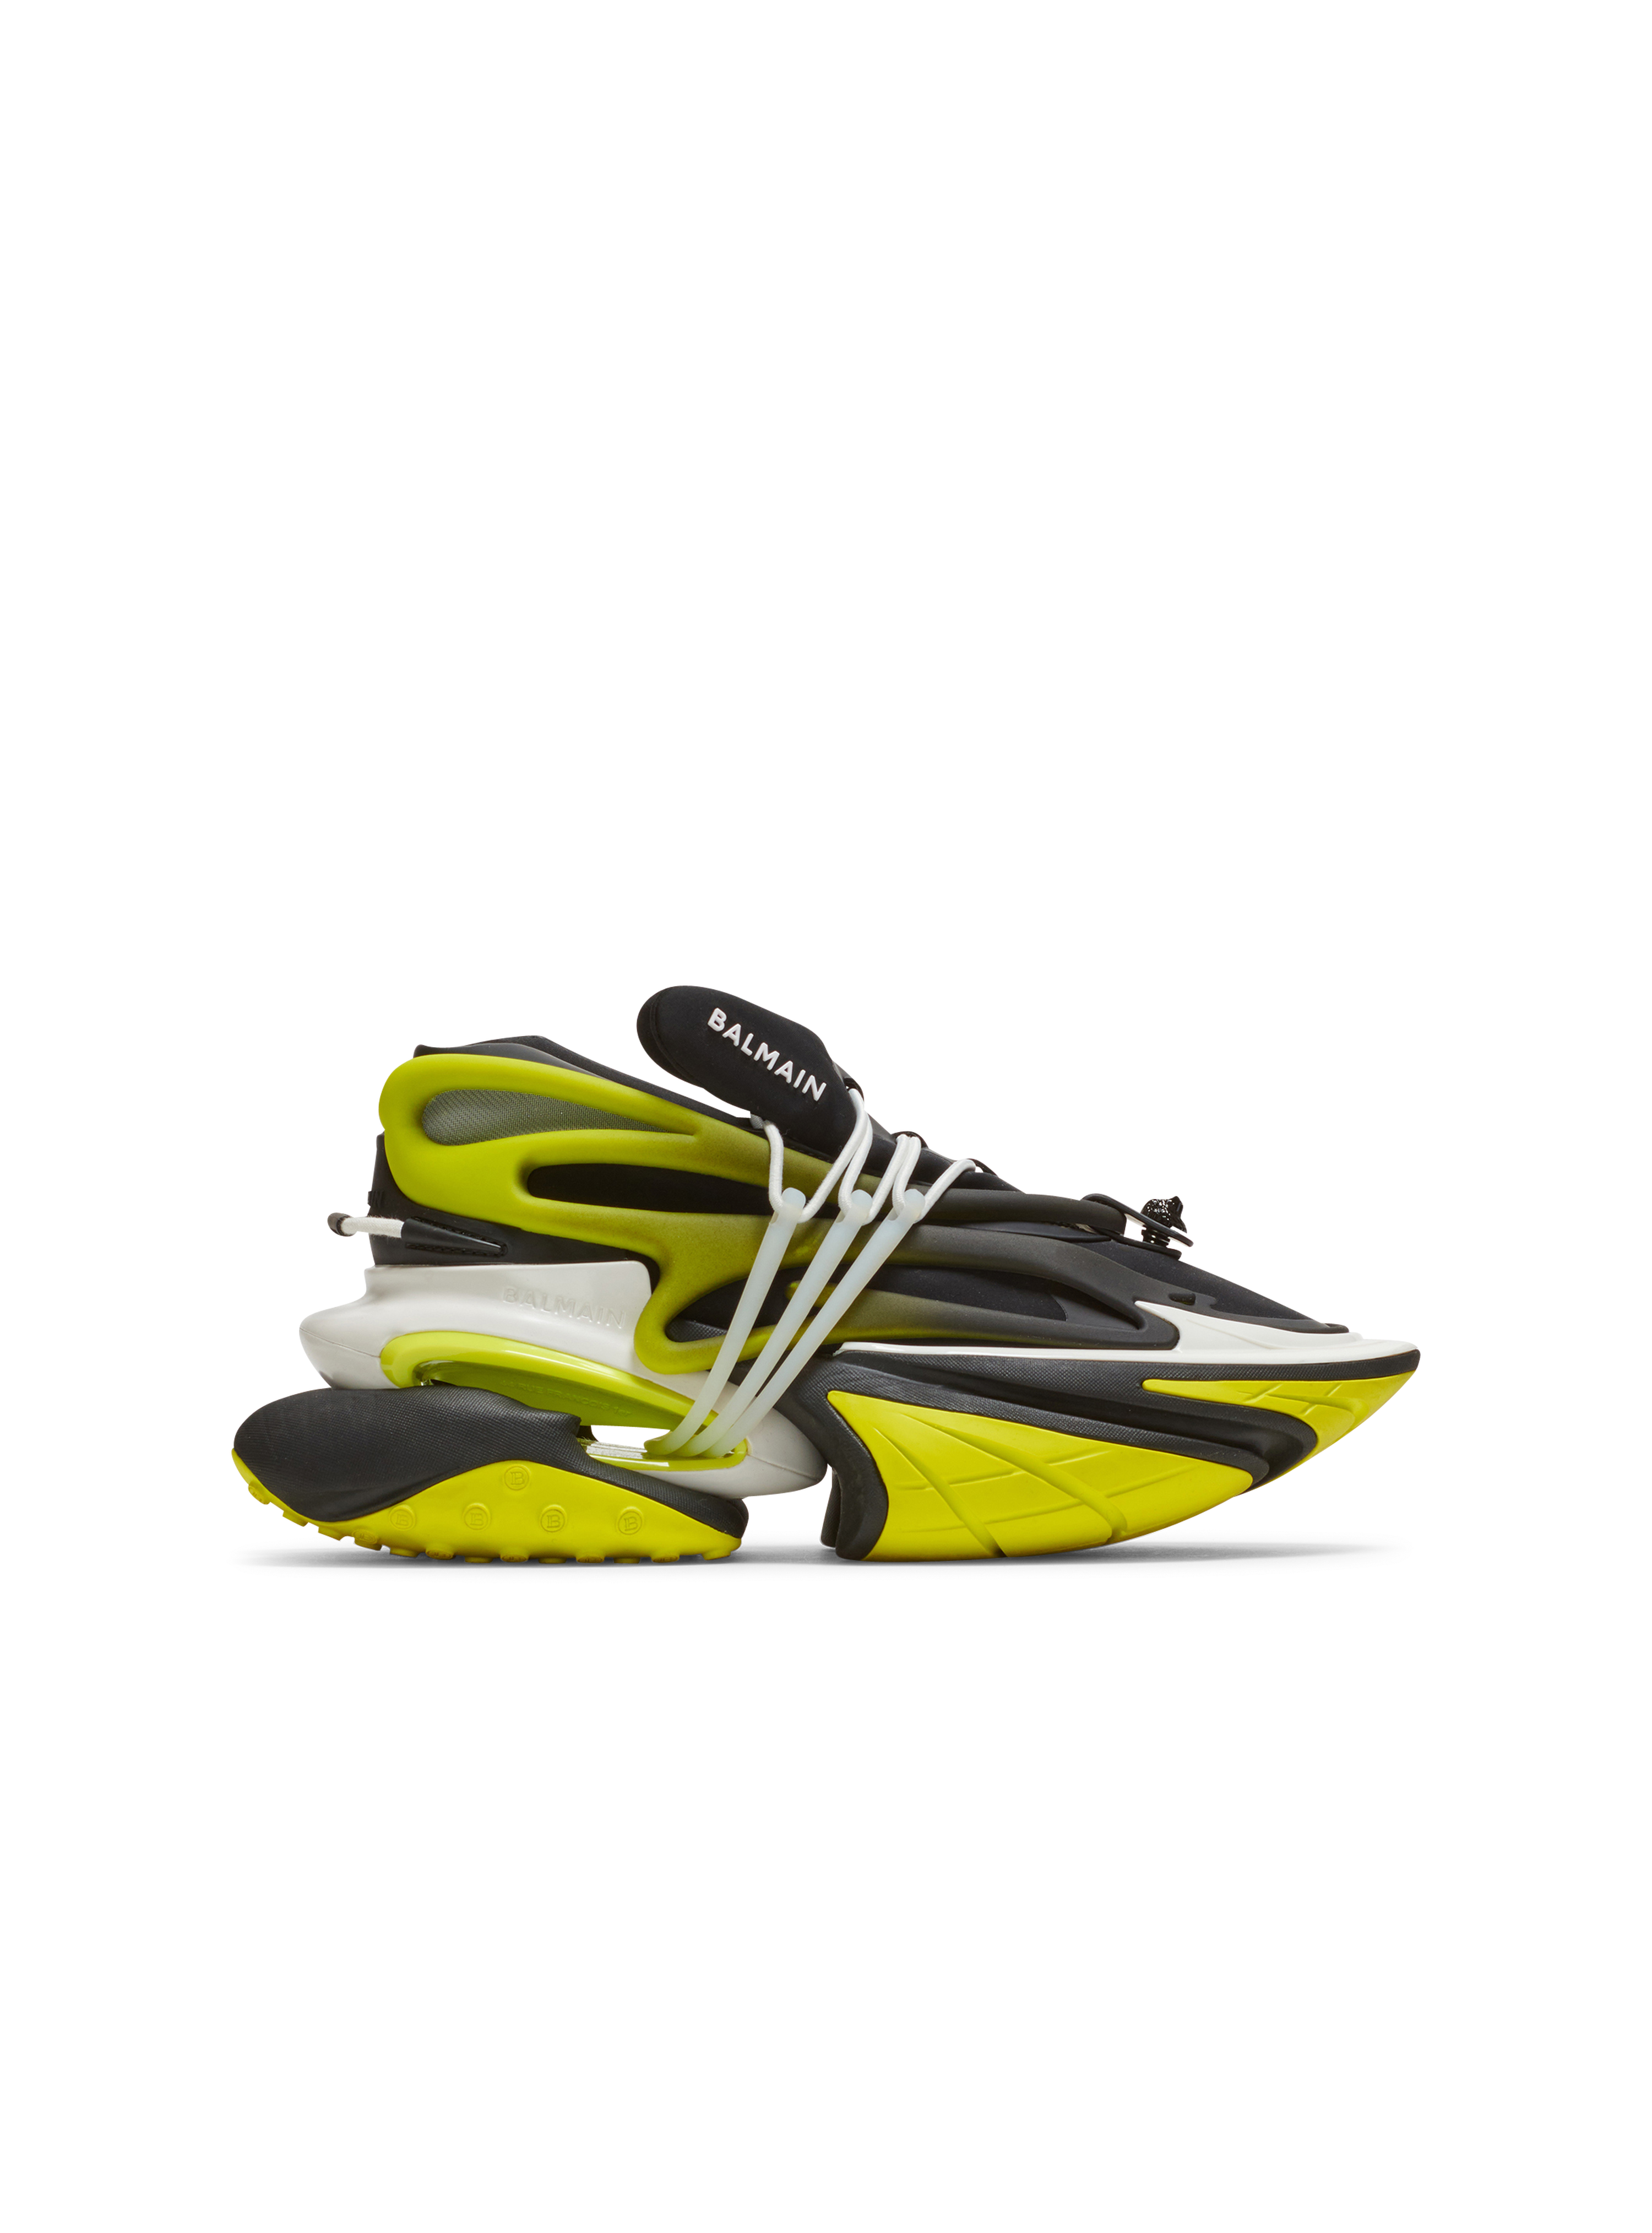 Unicorn low-top trainers in neoprene and leather, yellow